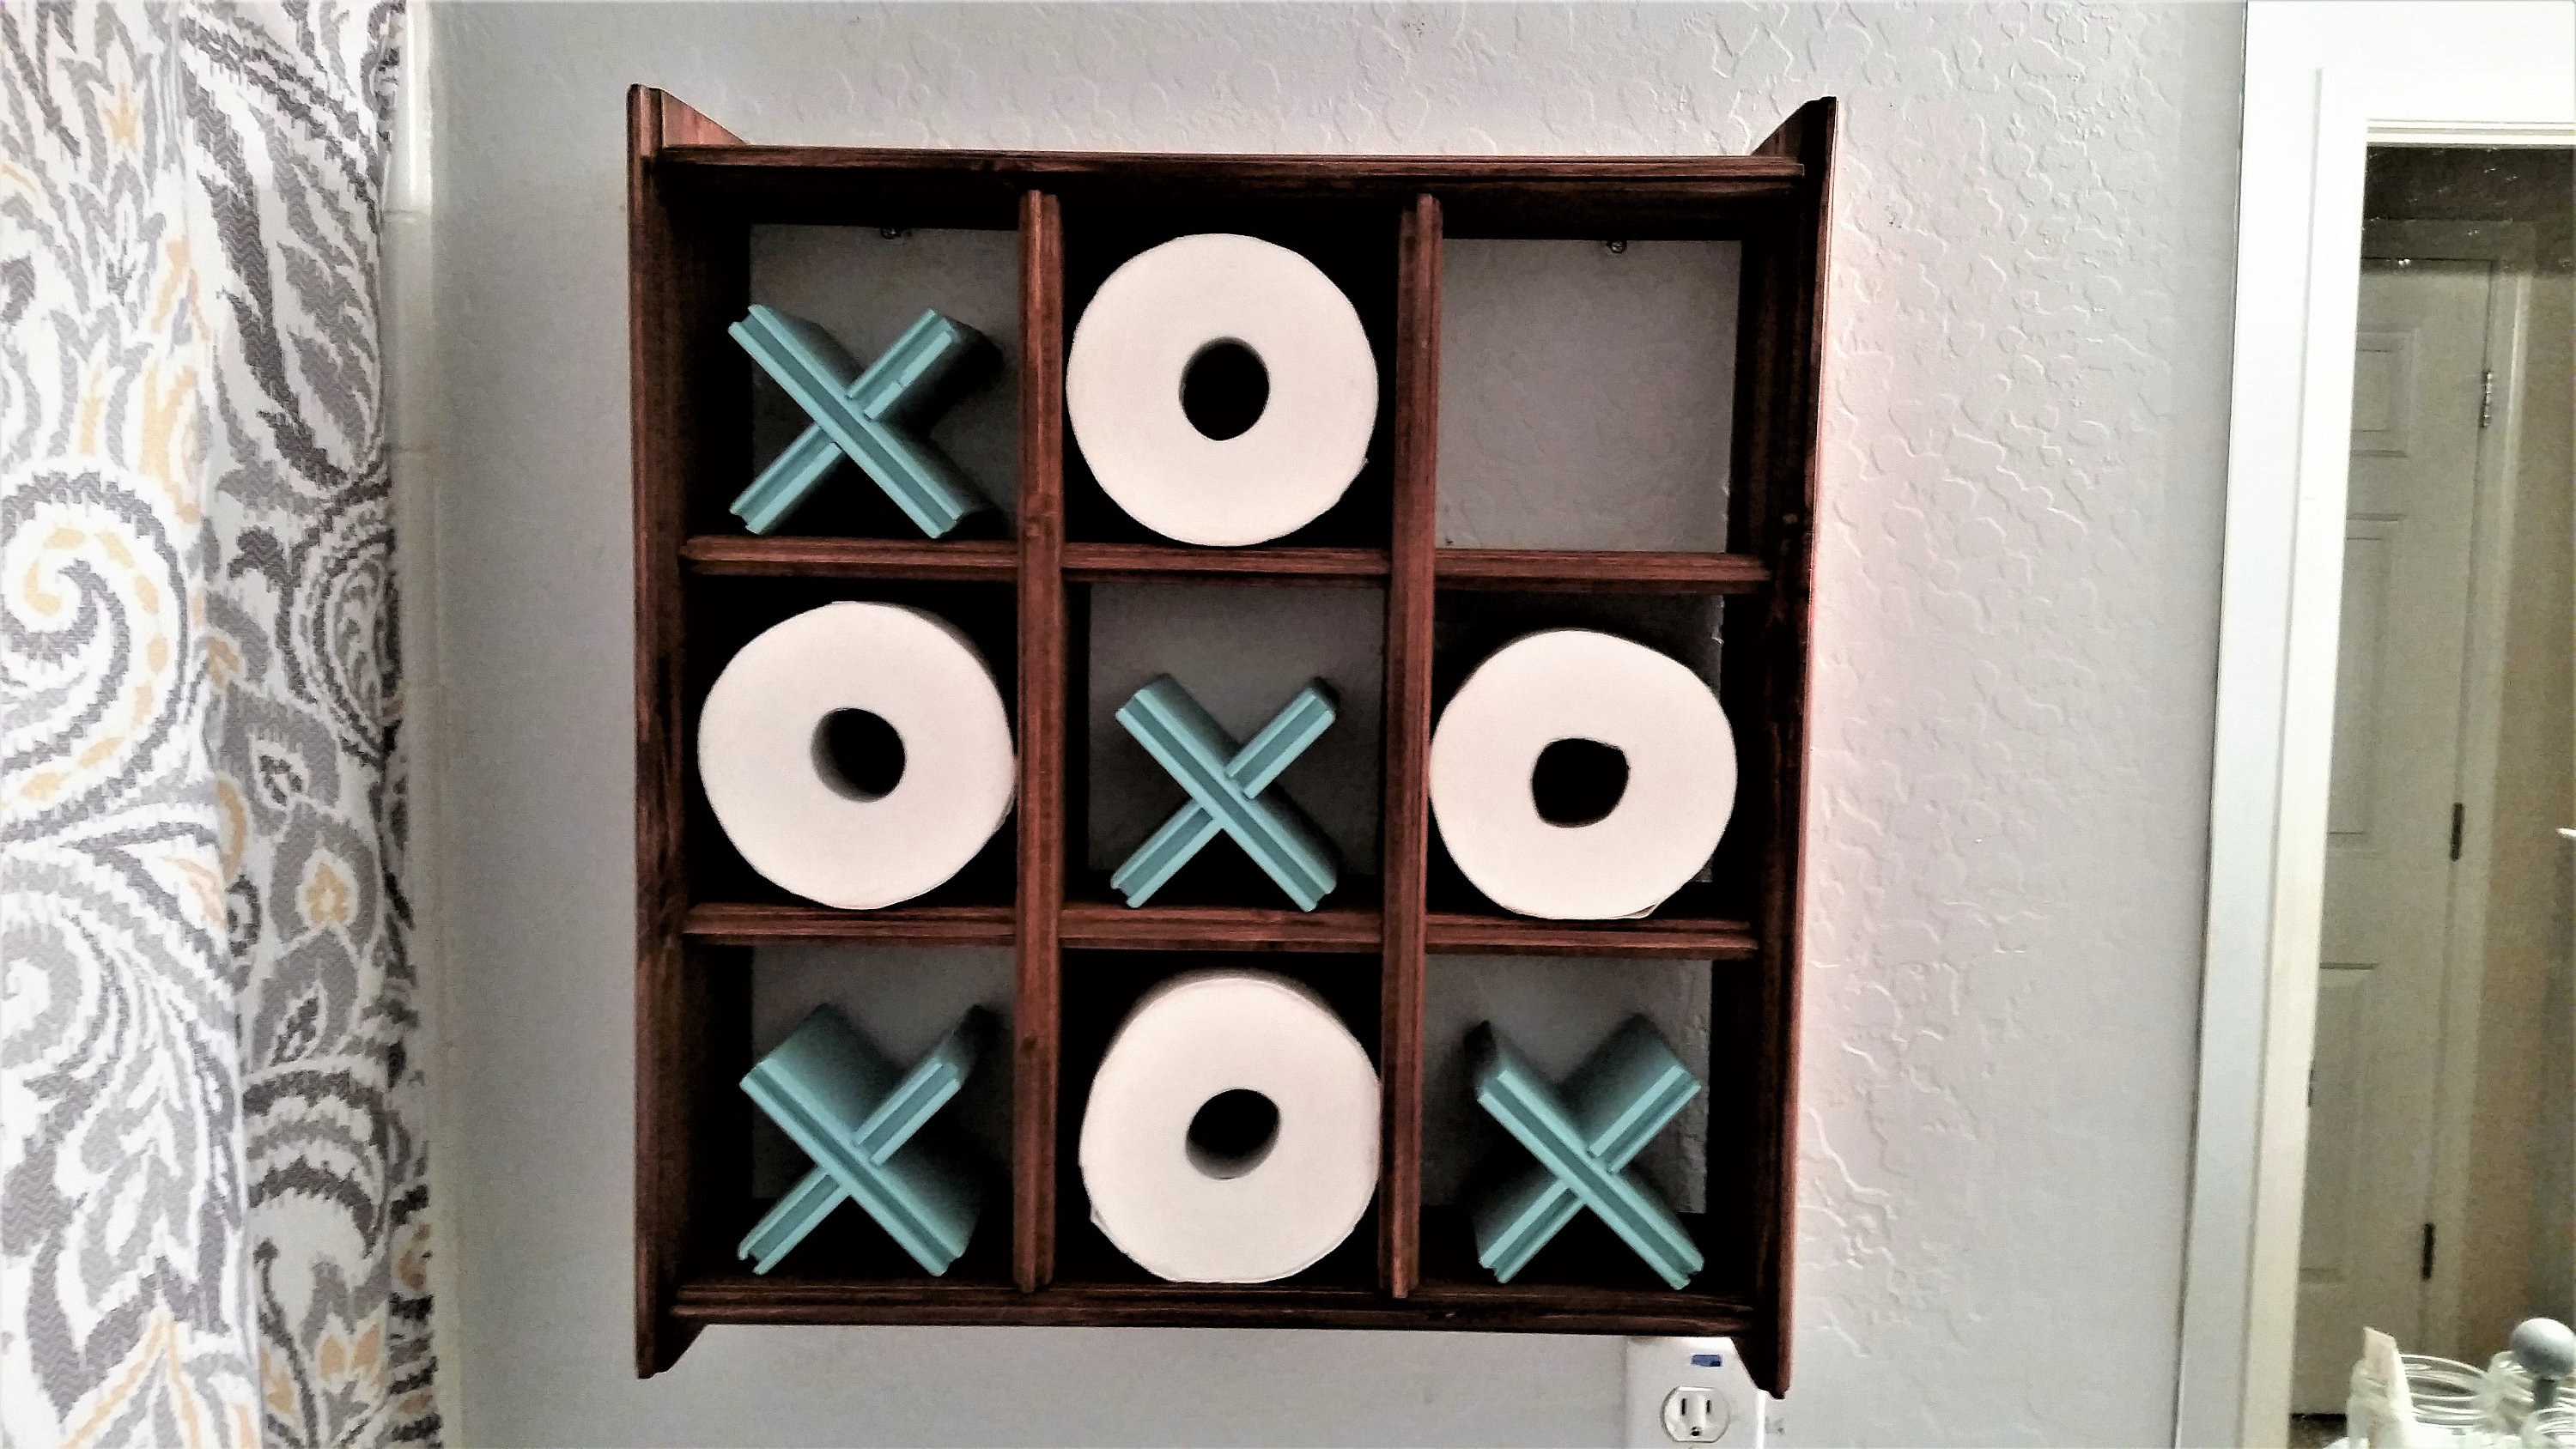 aa shelf with nine squares built in, four of them filled with blue X&#x27;s four others filled with toilet paper as O&#x27;s